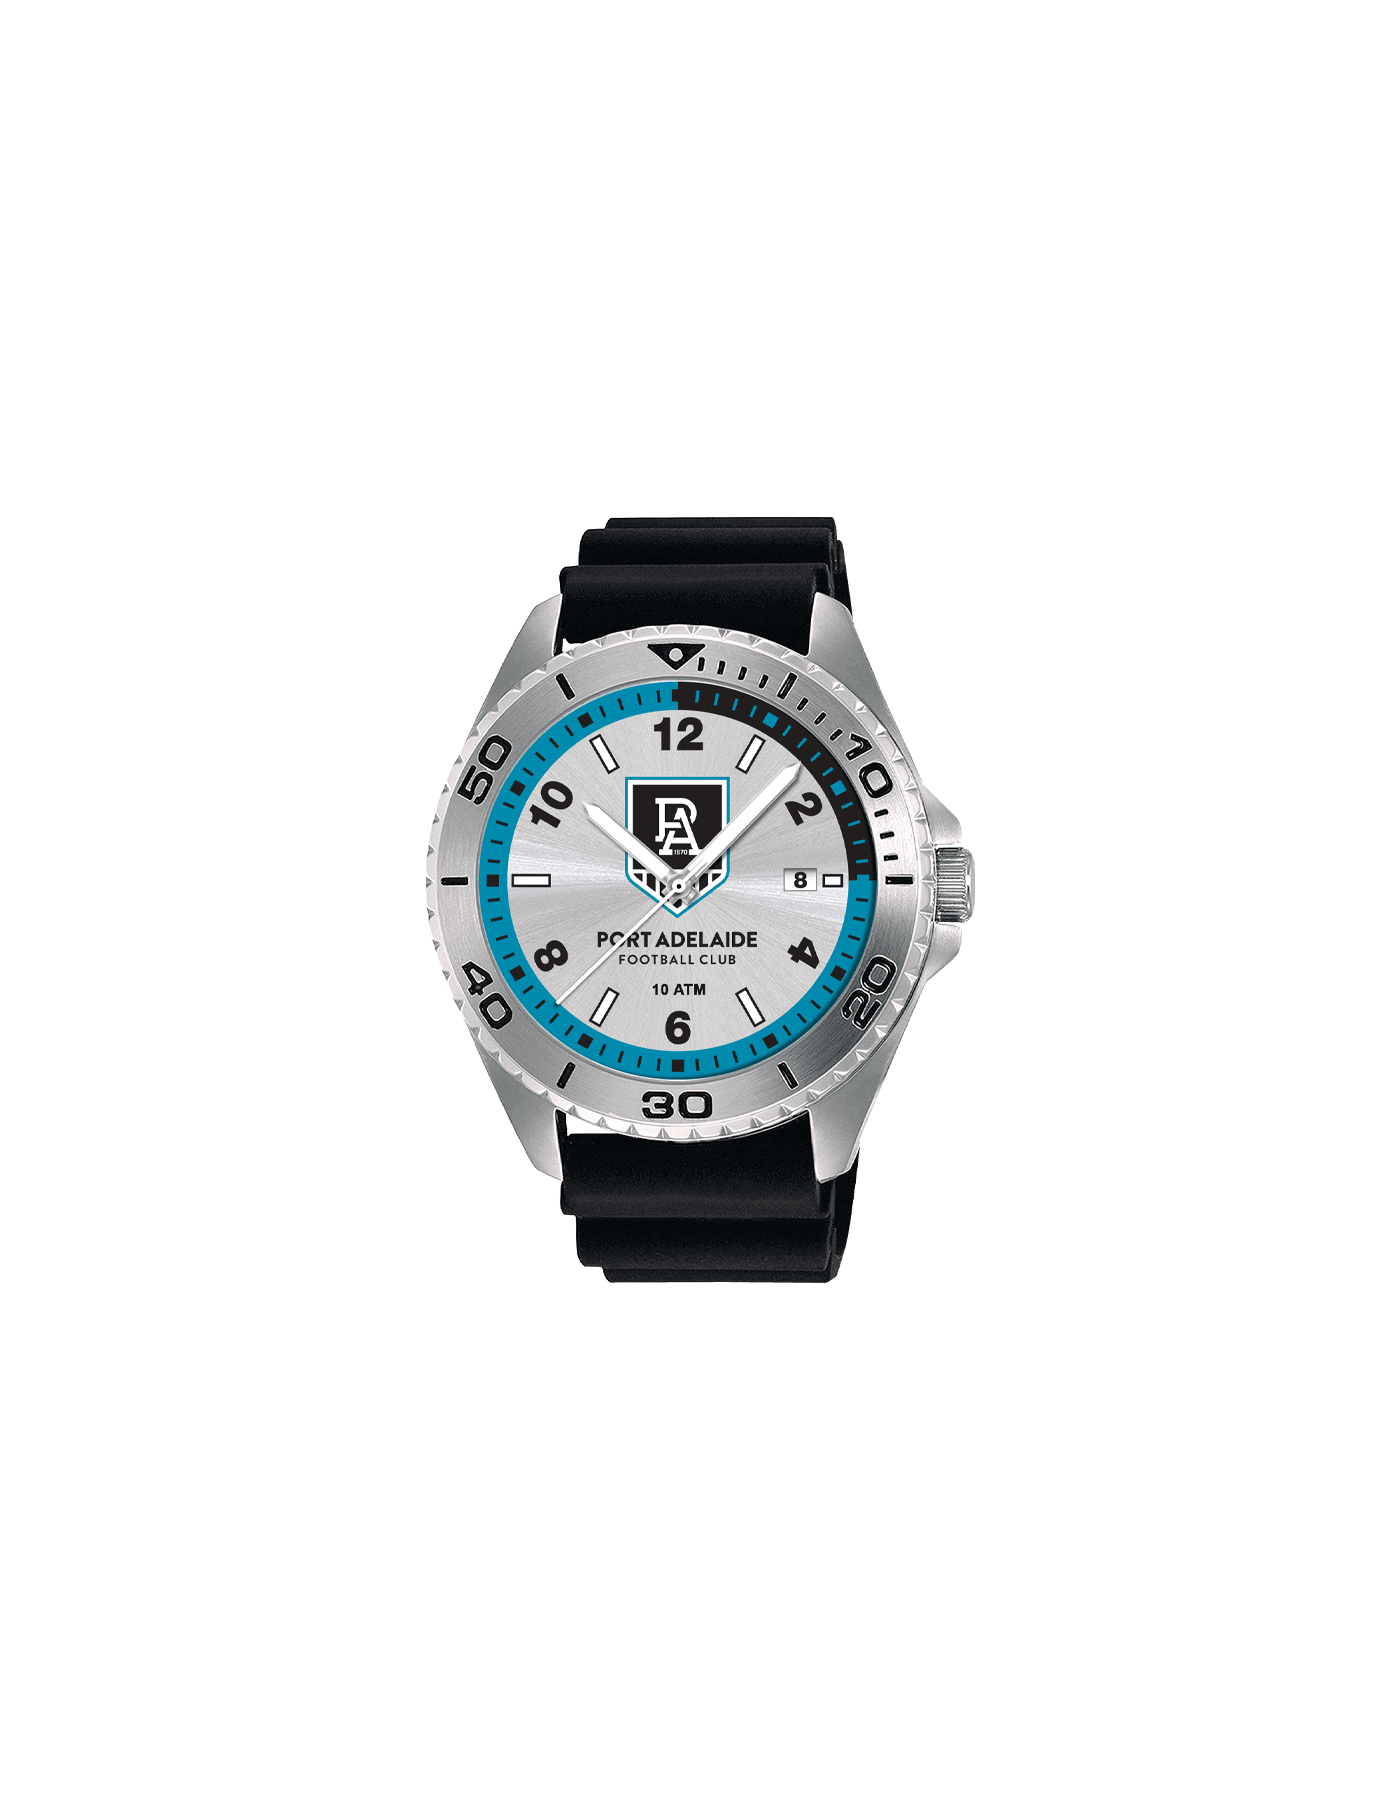 PORT ADELAIDE POWER AFL TRY SERIES WATCH_PORT ADELAIDE POWER_STUBBY CLUB